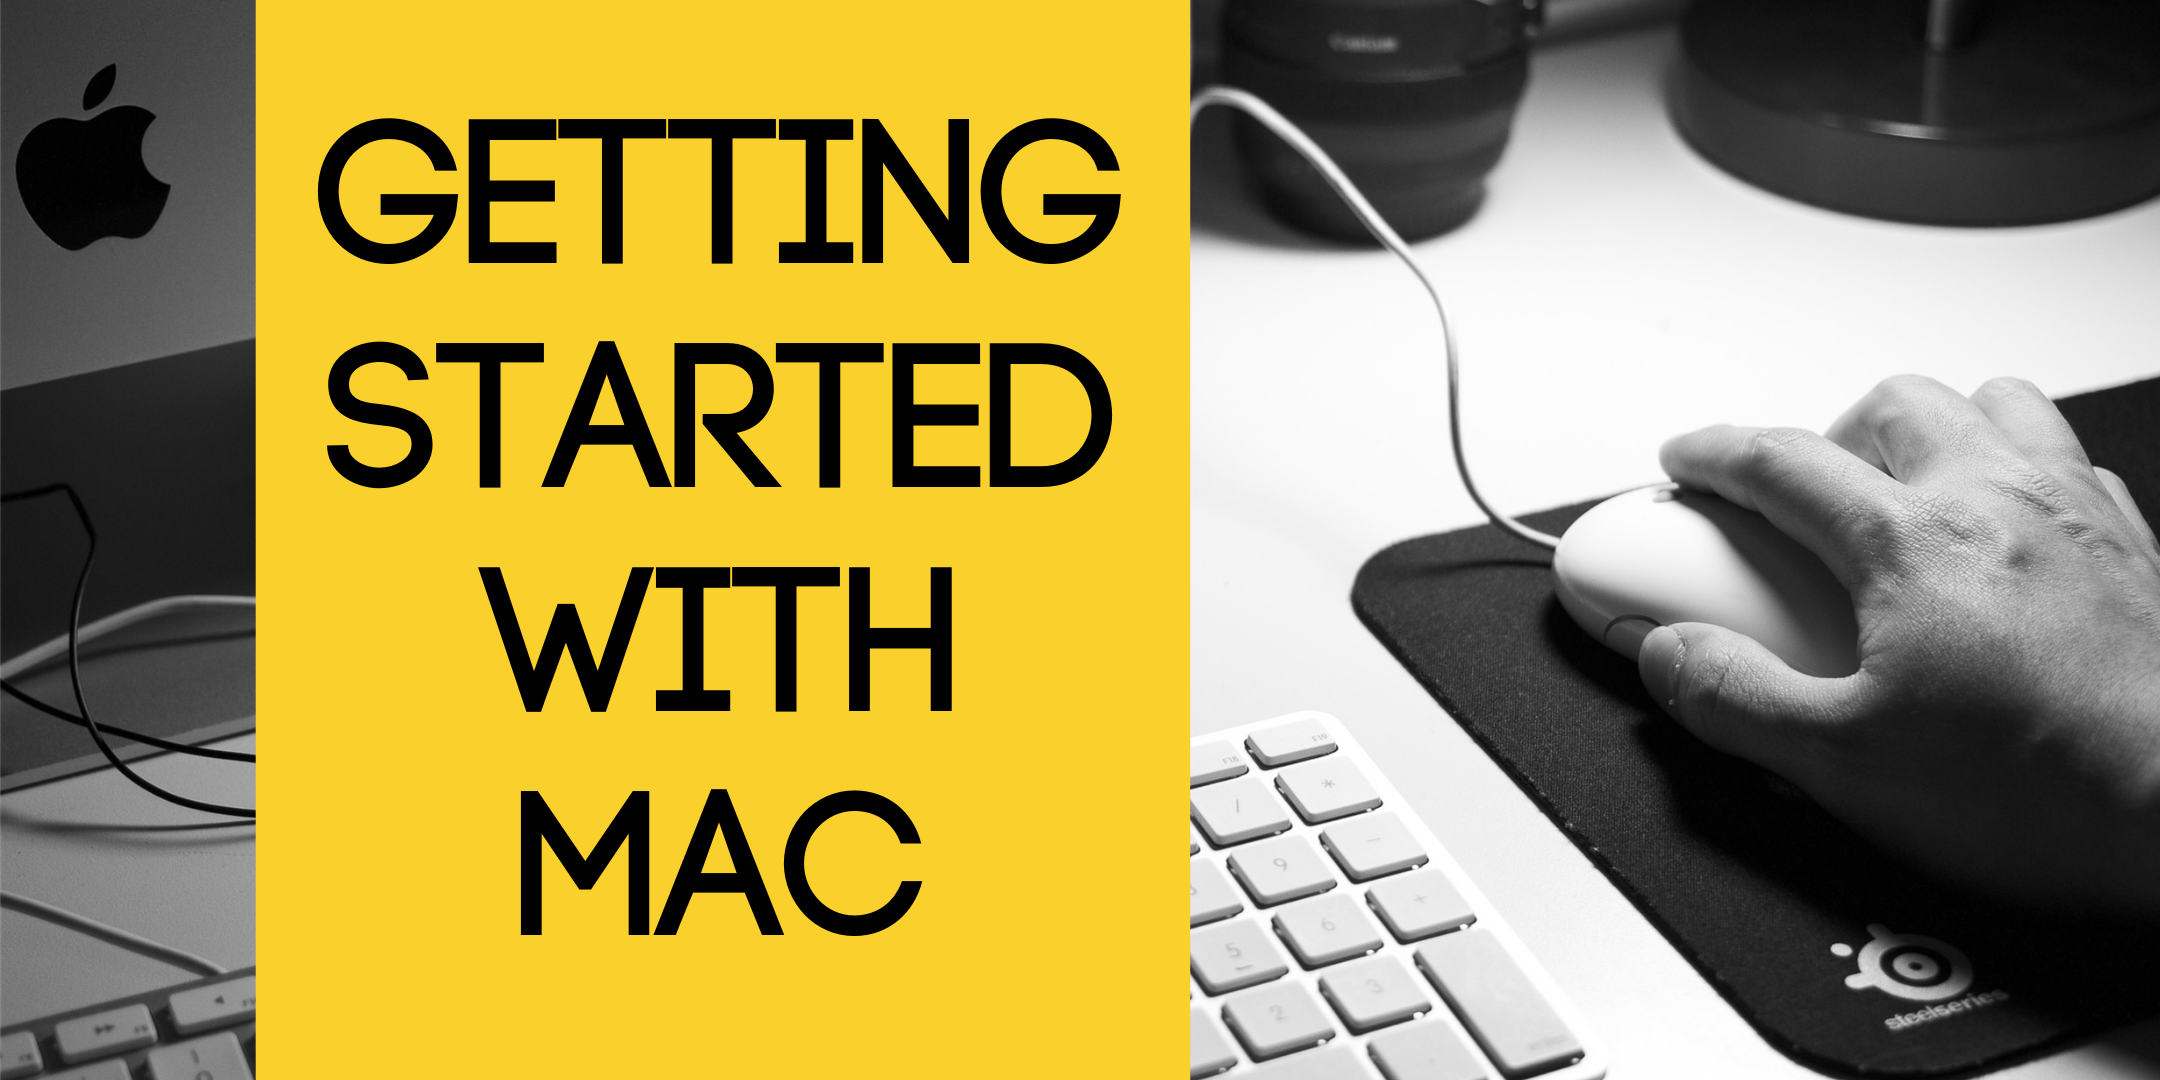 image of "Getting Started with Mac"